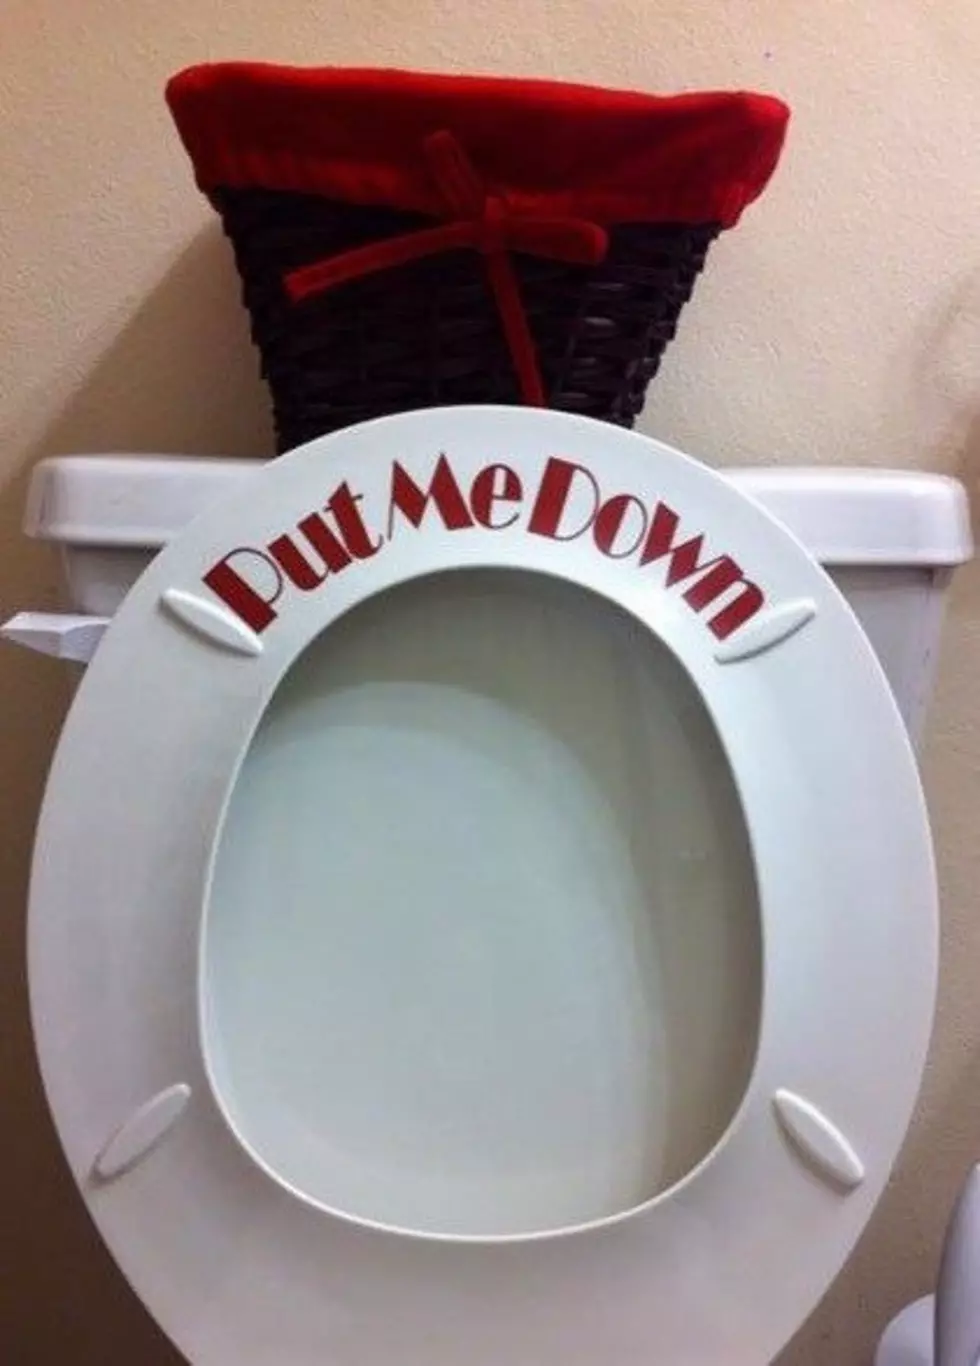 5 Hilarious Bathroom Decorations from Missouri Etsy Stores